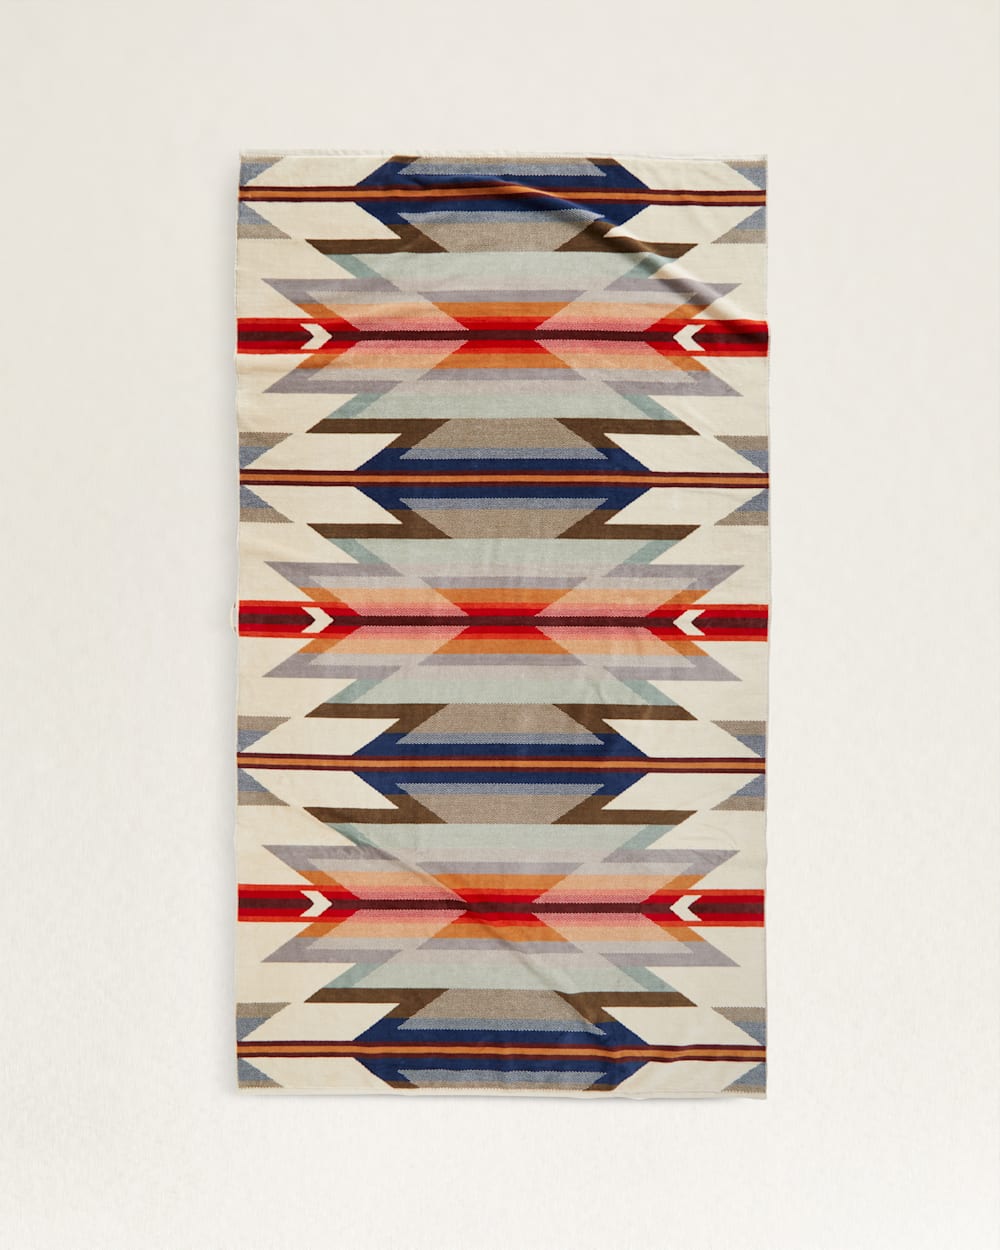 A colorful rectangular rug with a geometric pattern featuring angular shapes in shades of blue, red, beige, and gray on a cream background, perfect for a bungalow in Scottsdale, Arizona. - Pendleton/Babblitt's Wholesale spa towel